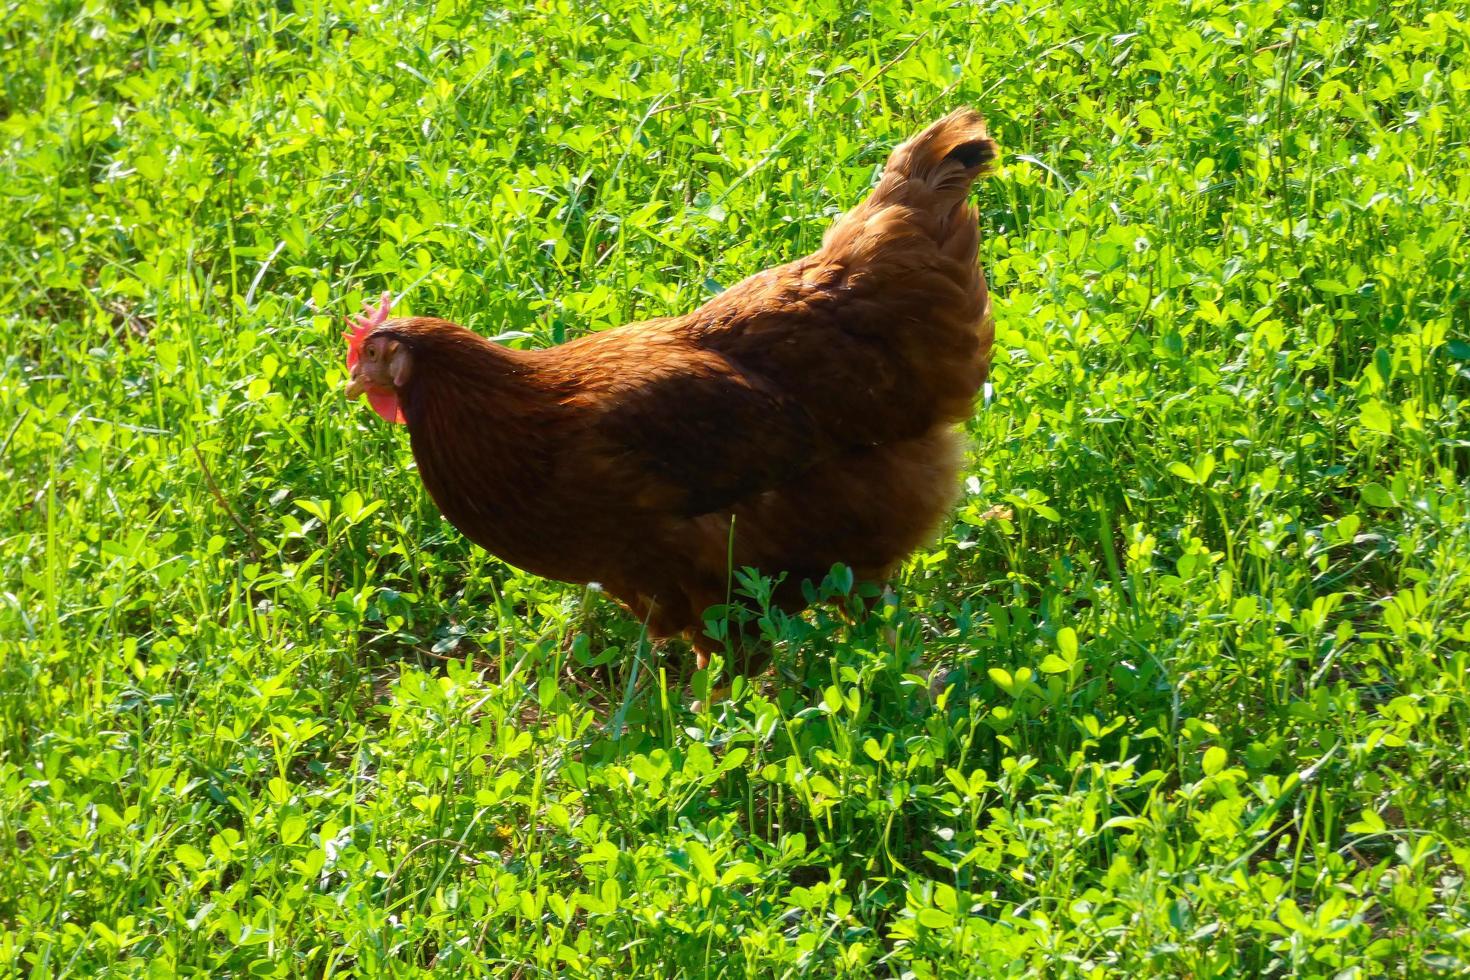 Hens in semi-freedom eating from the ground photo